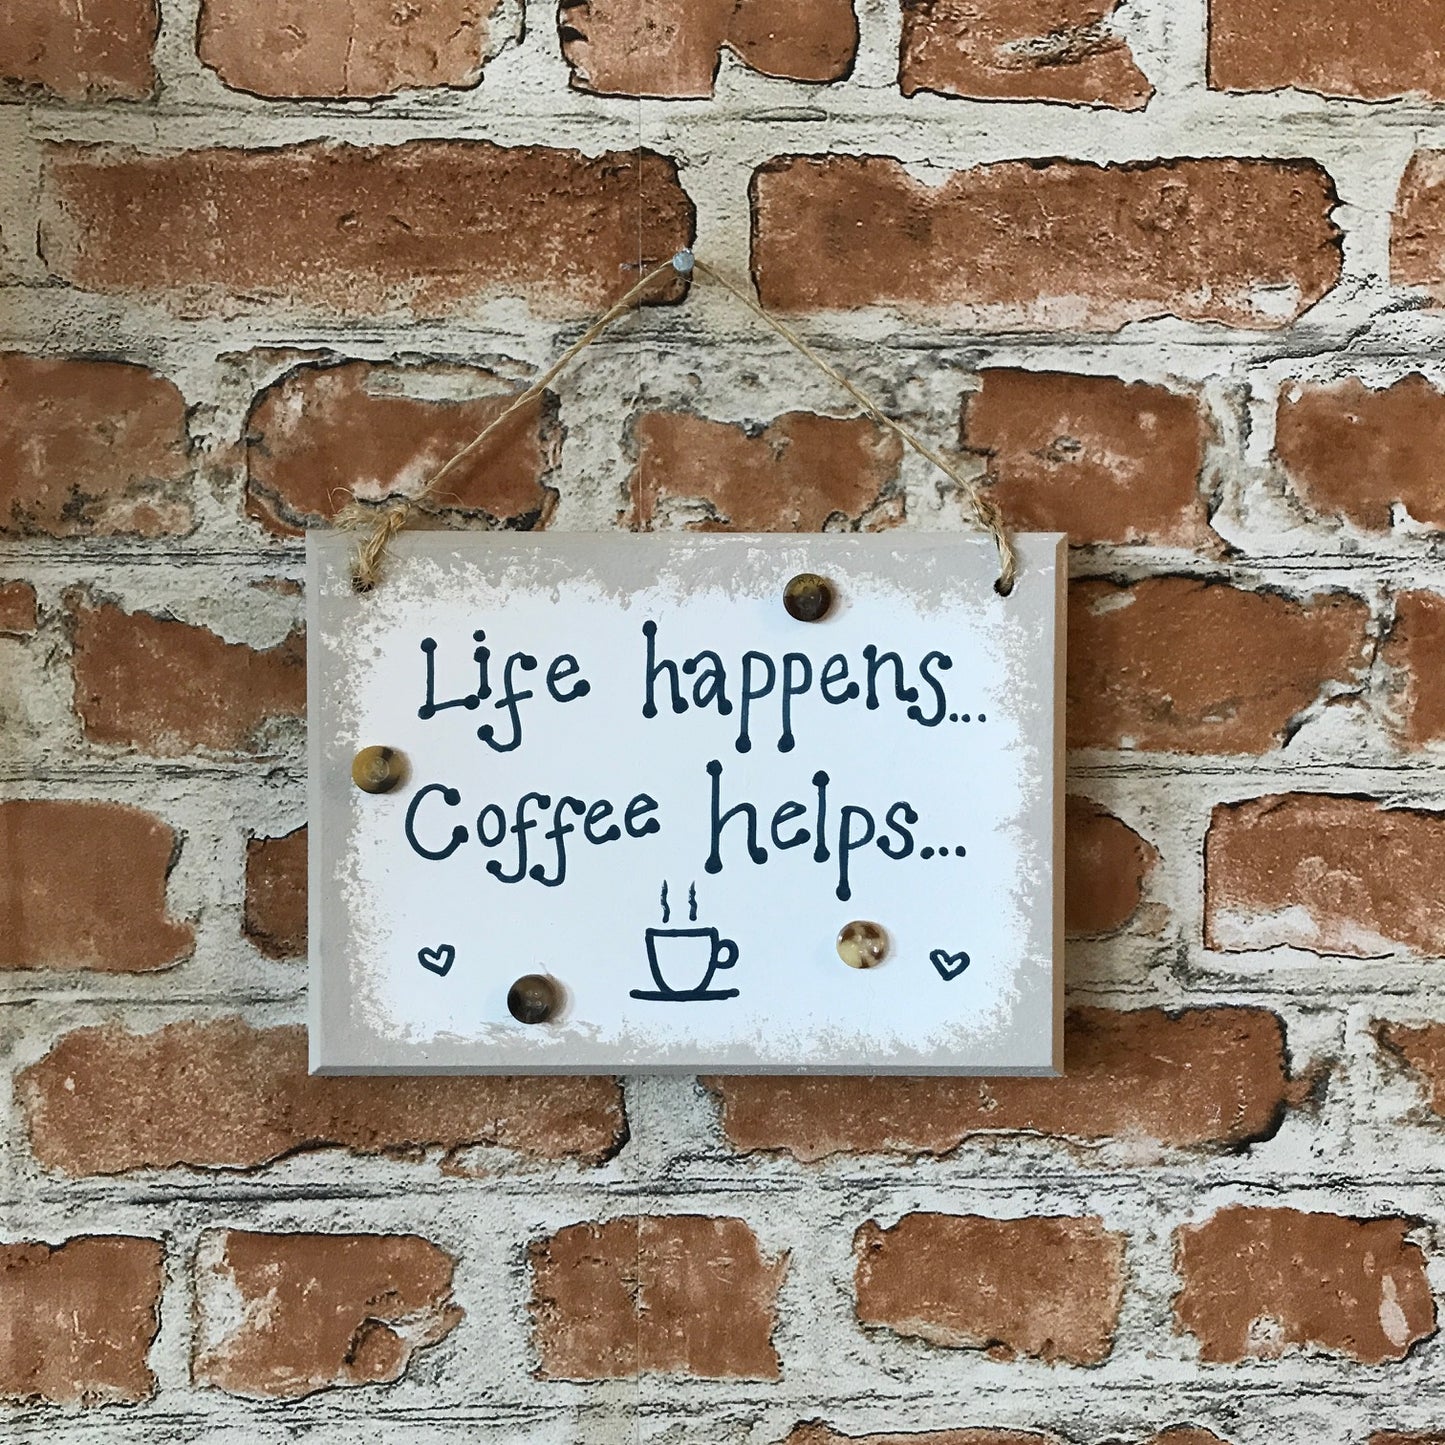 Life happens... Coffee helps... - Handmade Wooden Plaque from The Wrong End of Town